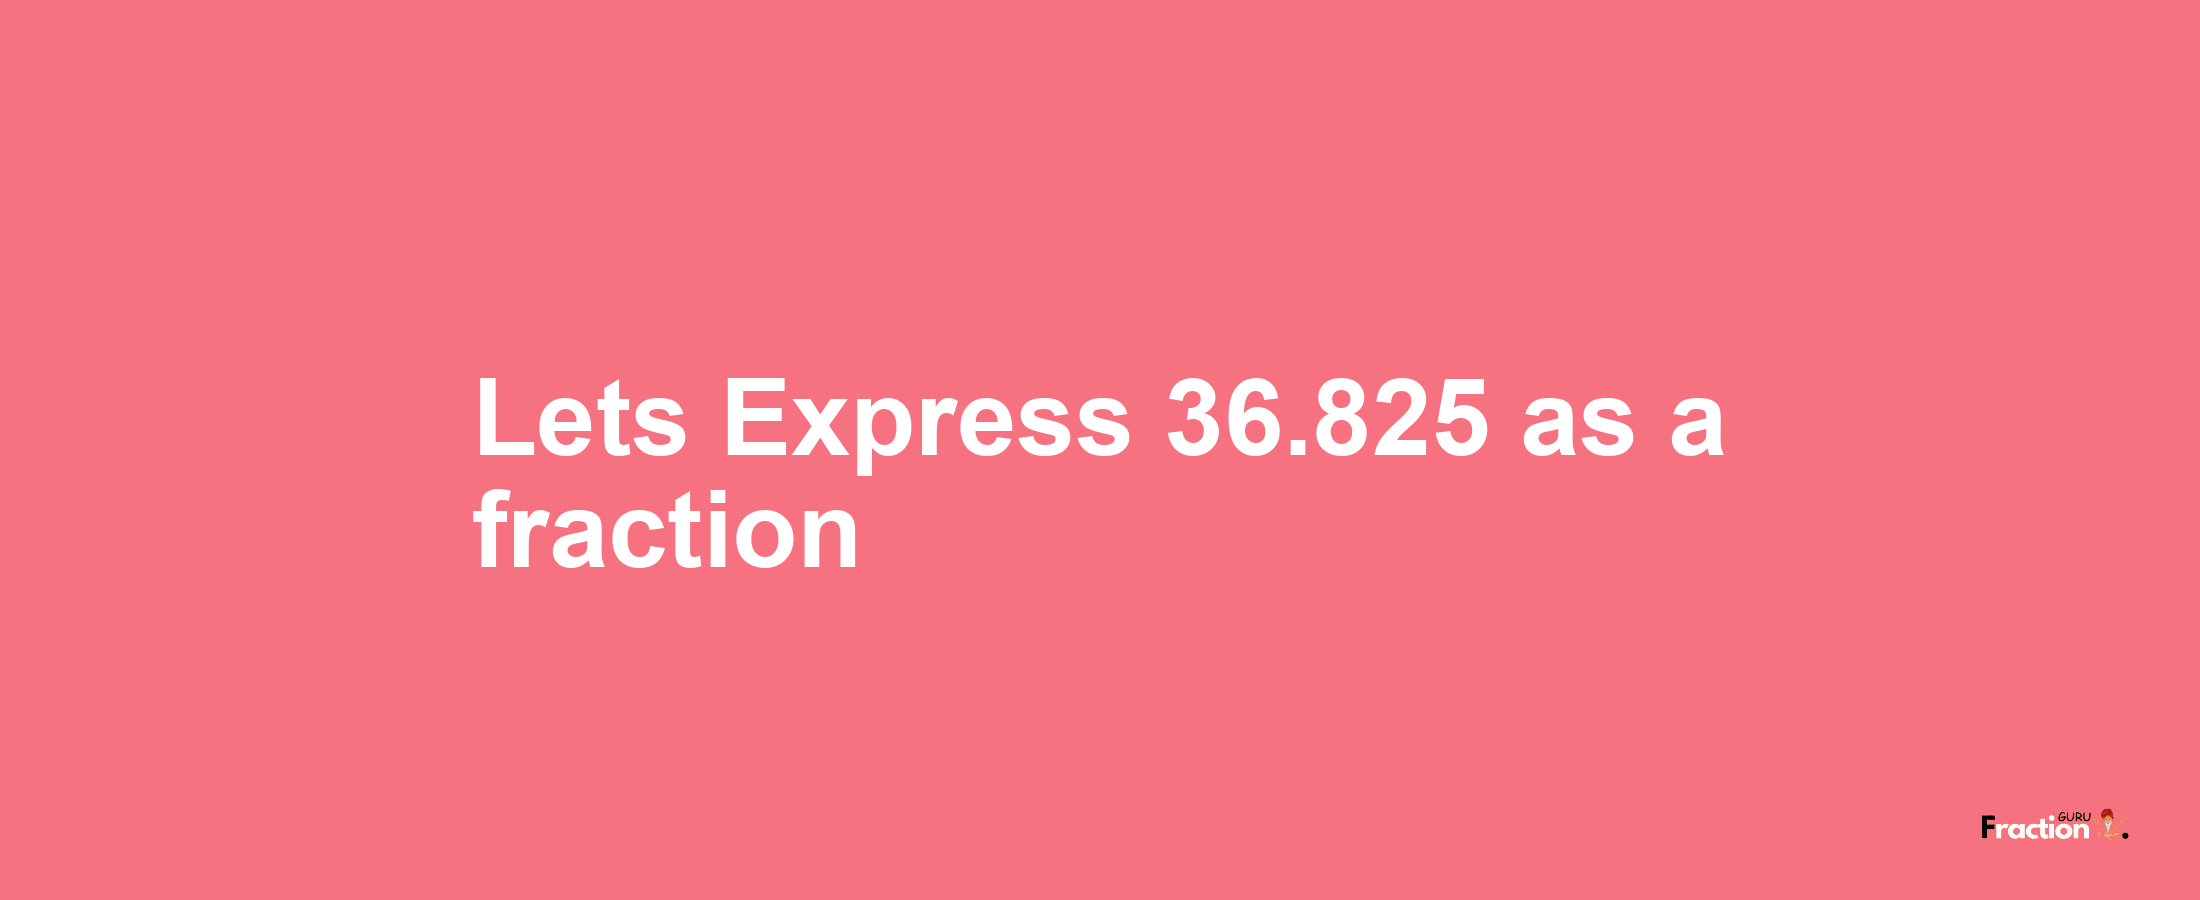 Lets Express 36.825 as afraction